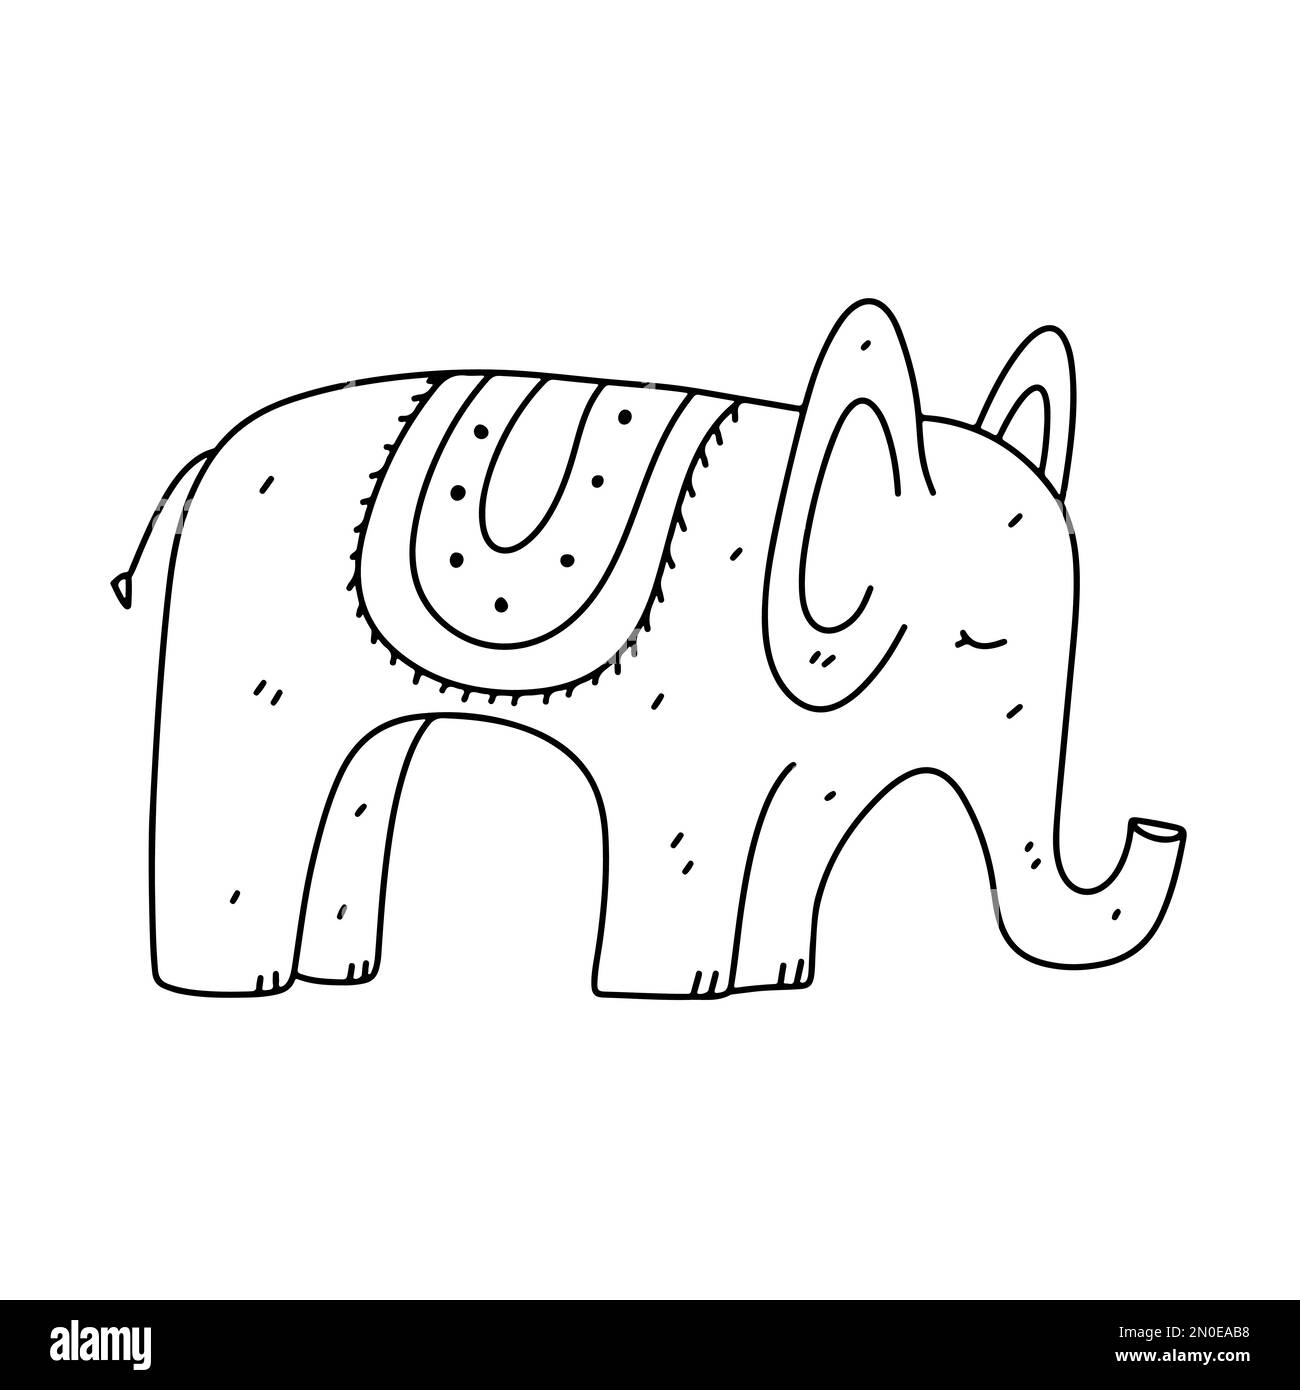 Funny elephant hand drawn doodle style. Isolated on white background. Coloring page Stock Vector